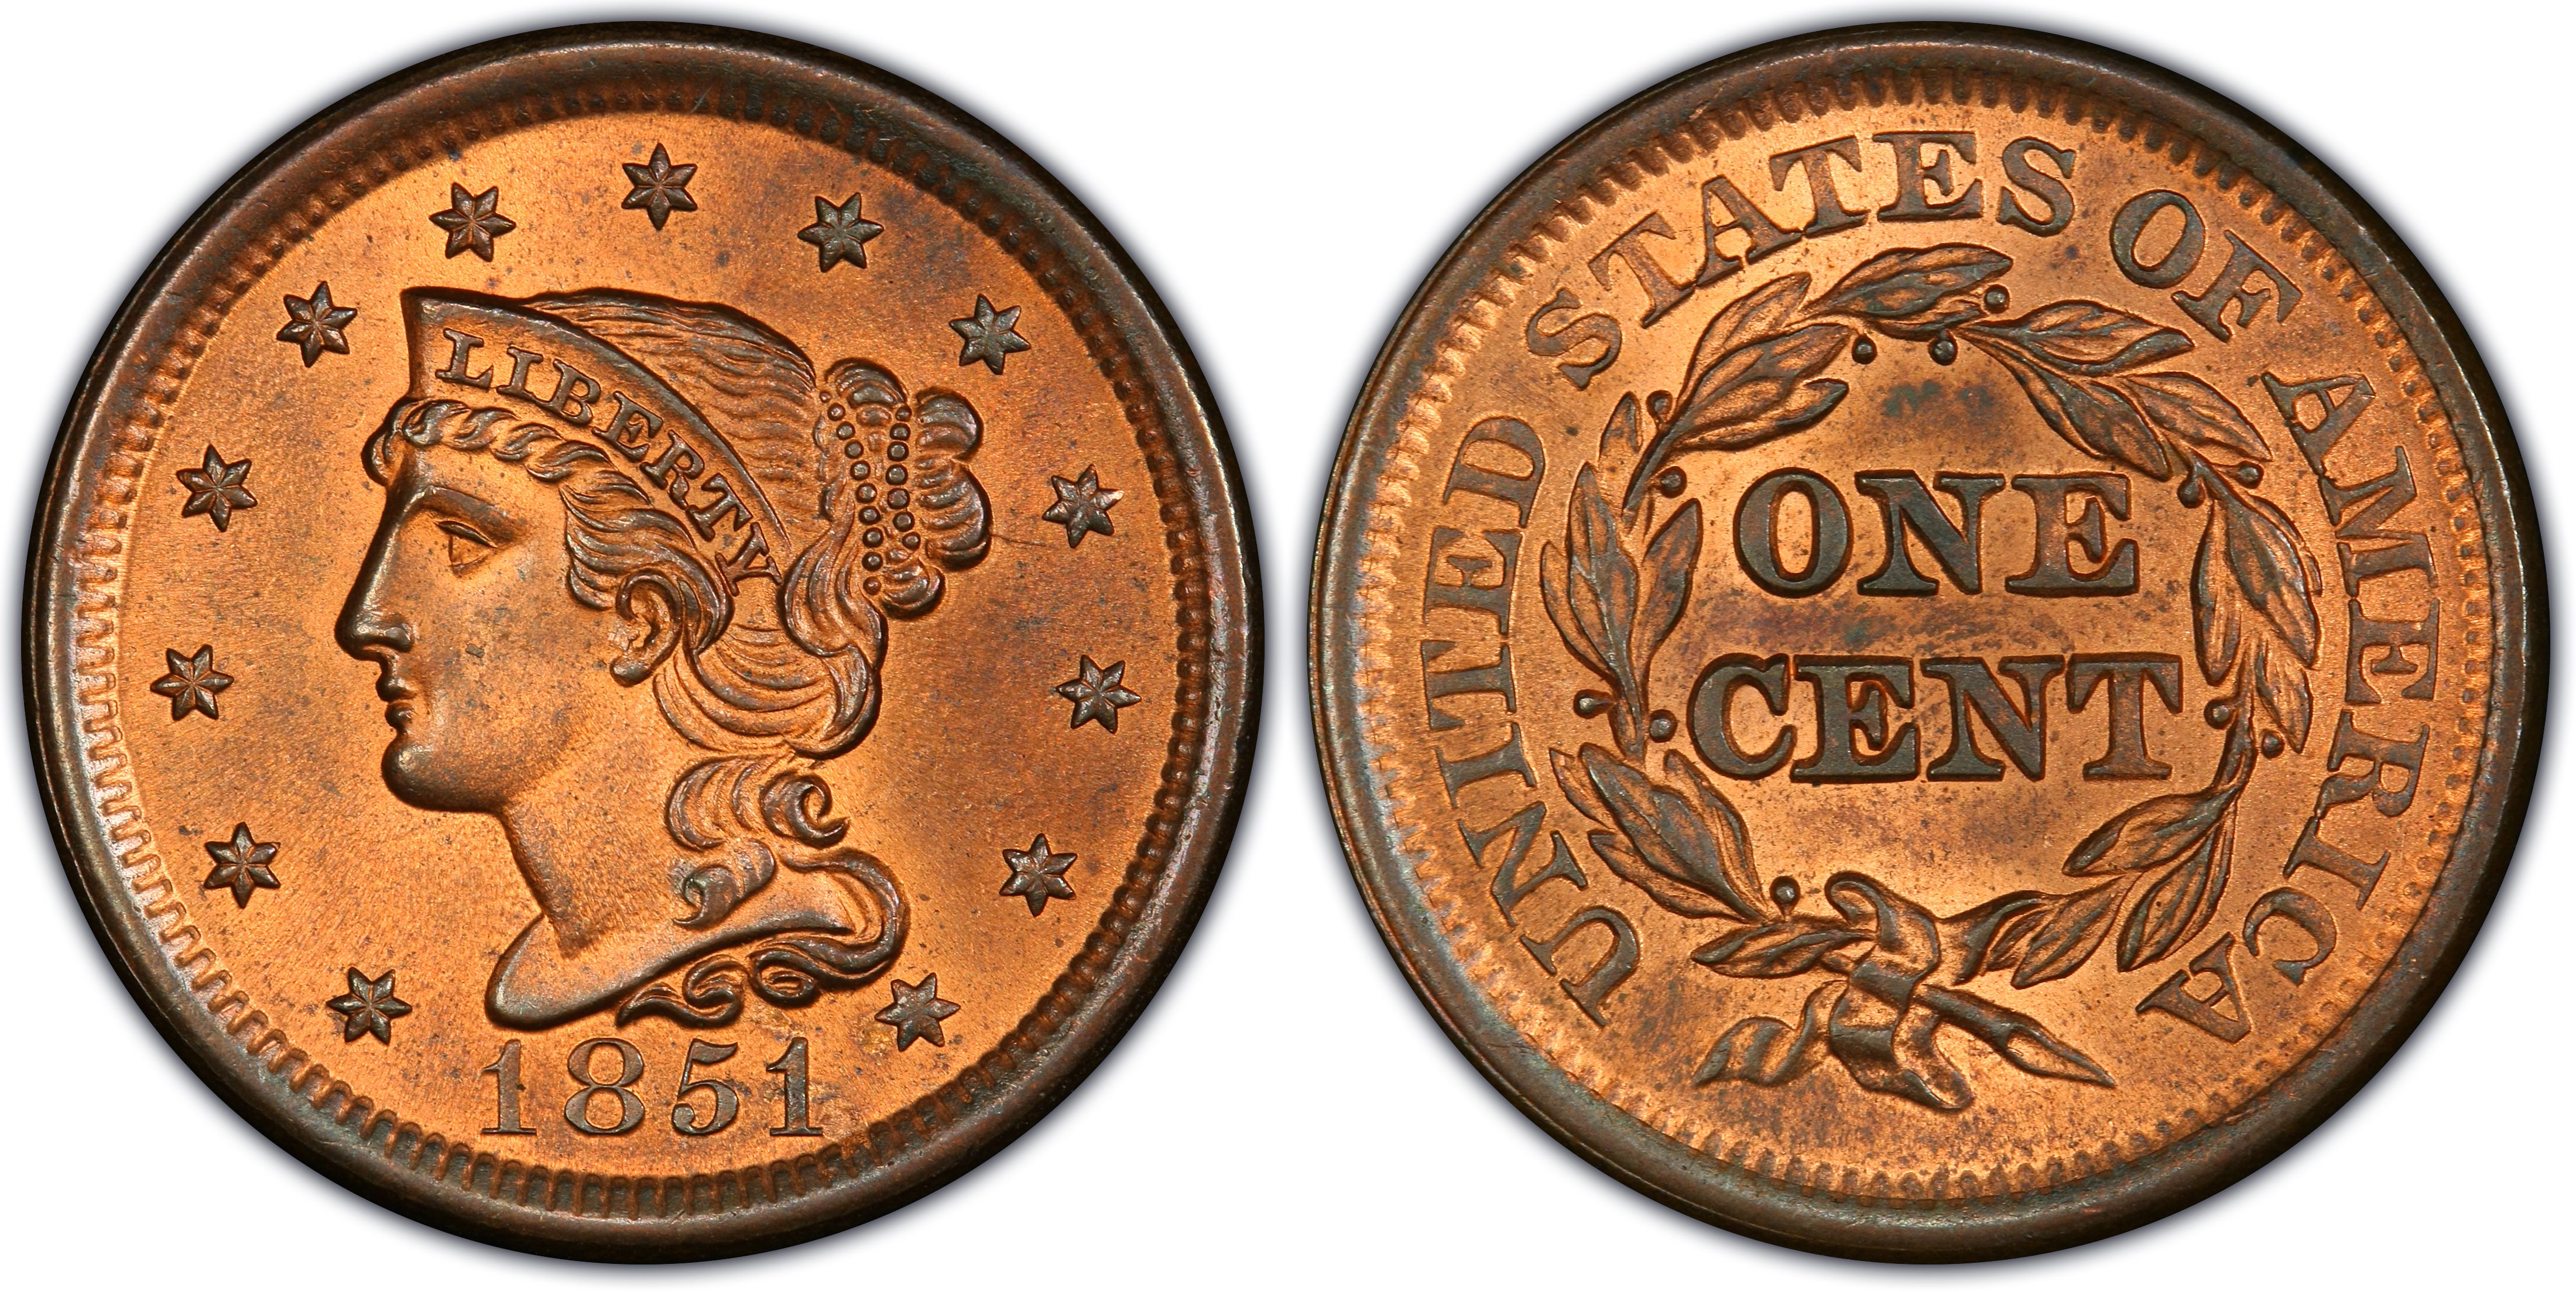 1851 1C Newcomb 18, RB (Regular Strike) Braided Hair Cent - PCGS CoinFacts